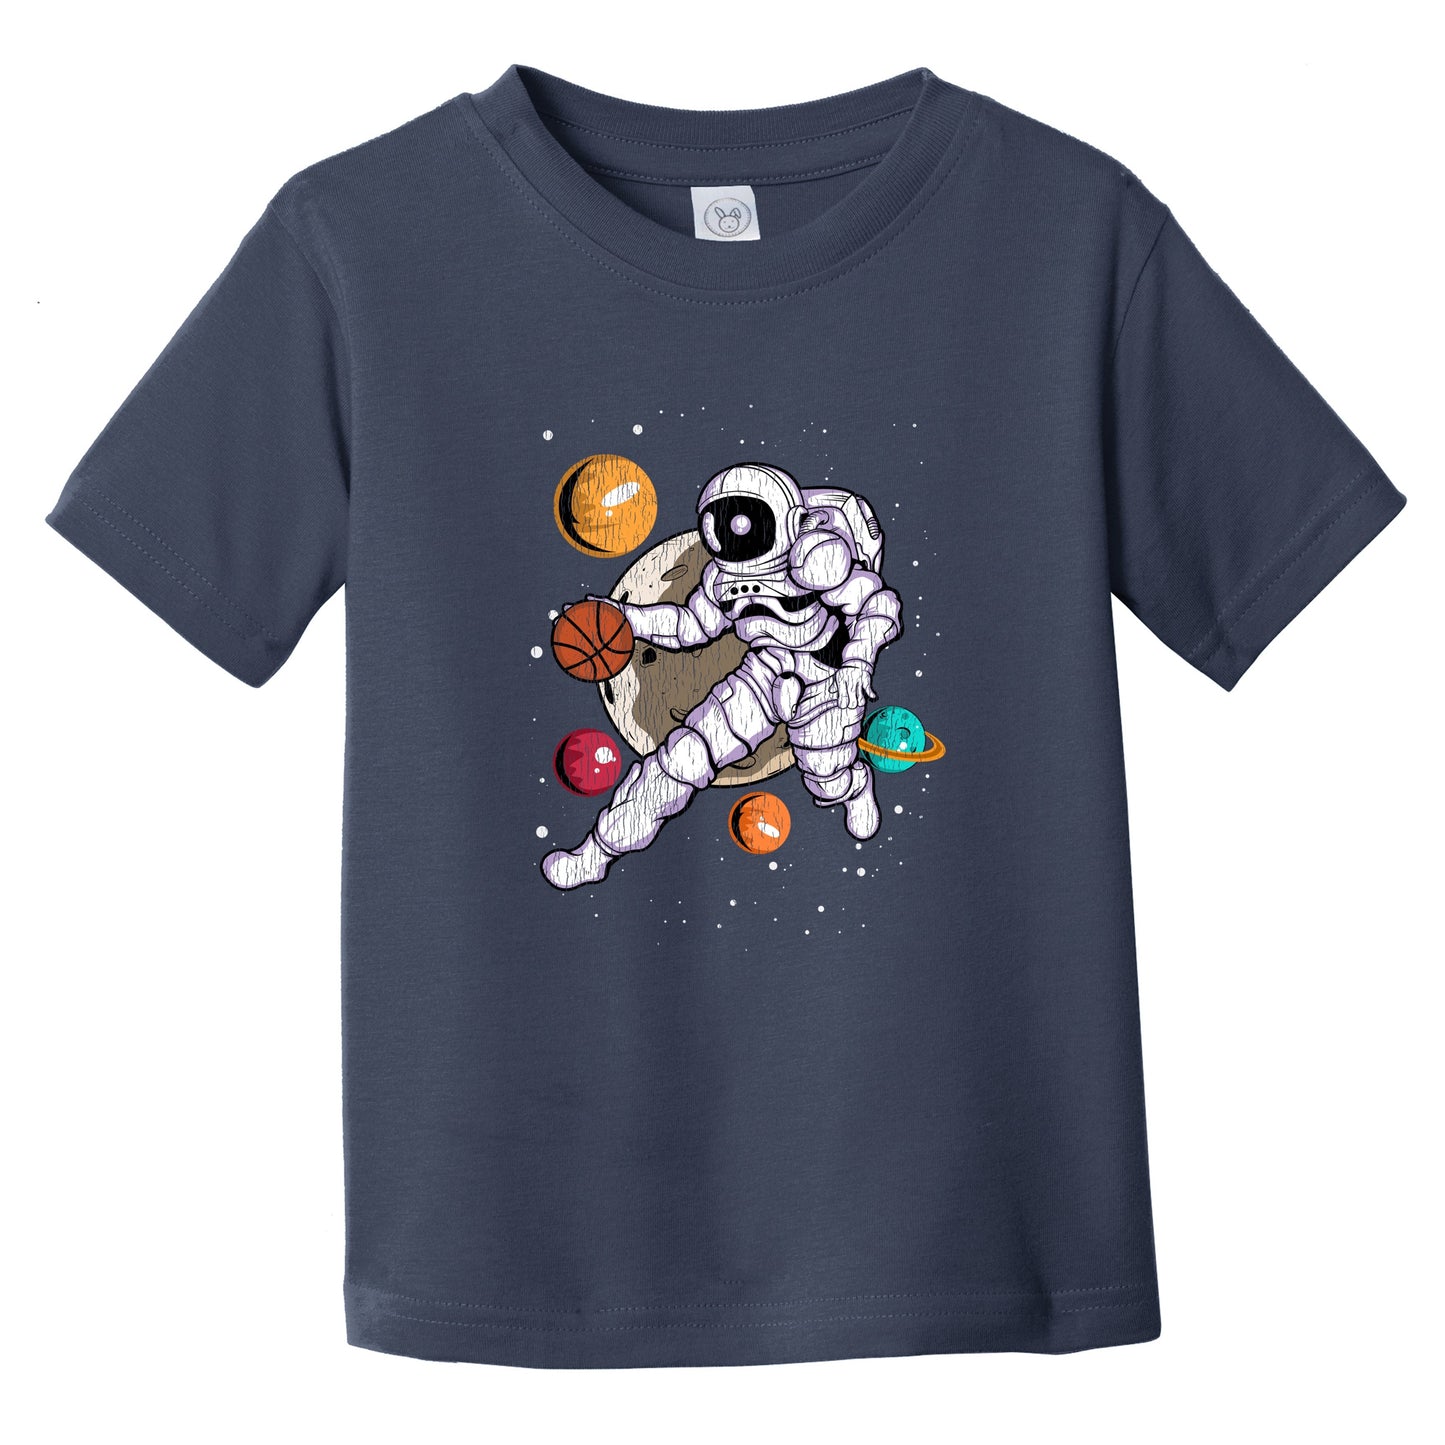 Basketball Astronaut Outer Space Spaceman Distressed Infant Toddler T-Shirt